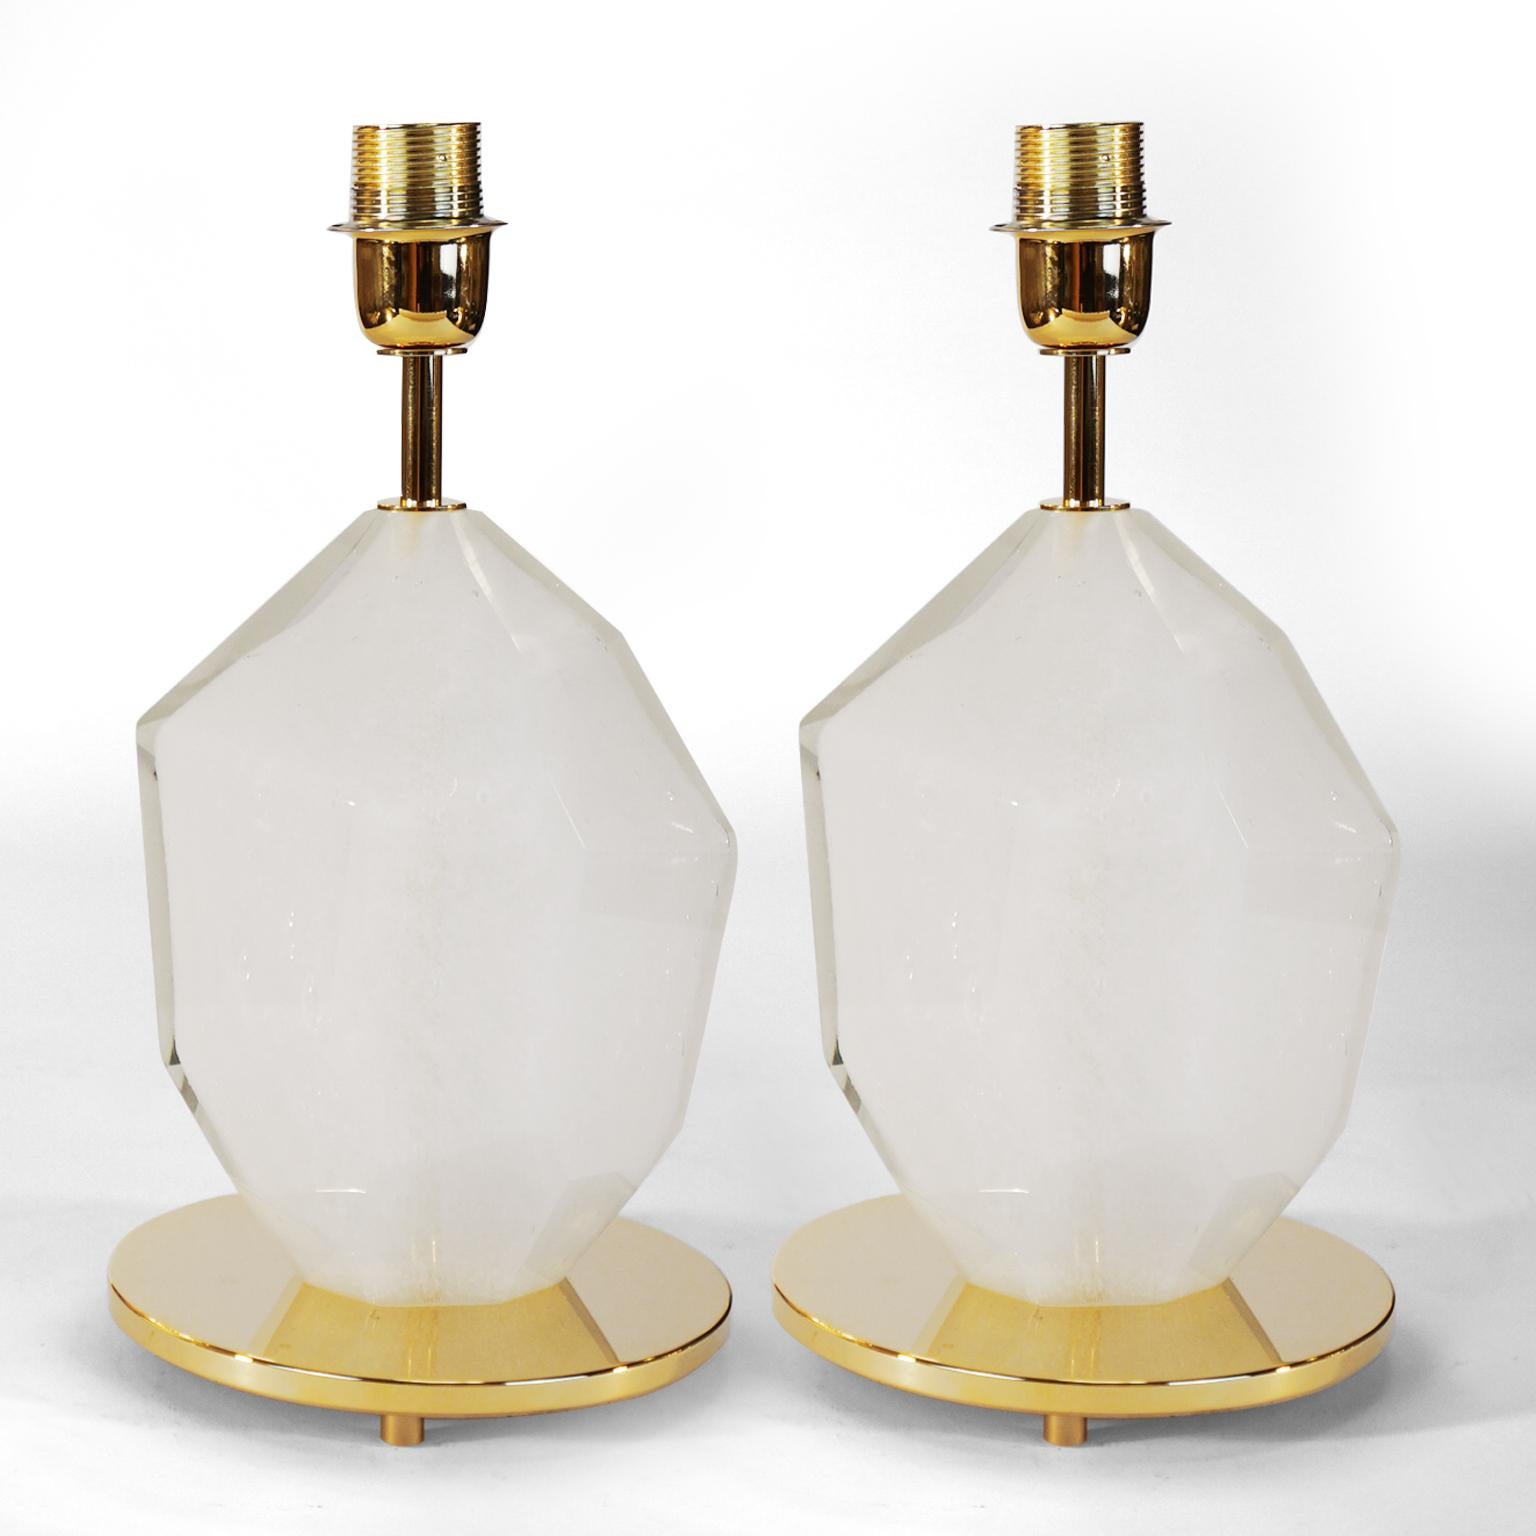 Toso Murano Pair of White Italian Venetian Glass Table Lamps Solid Faceted, 1990 For Sale 1